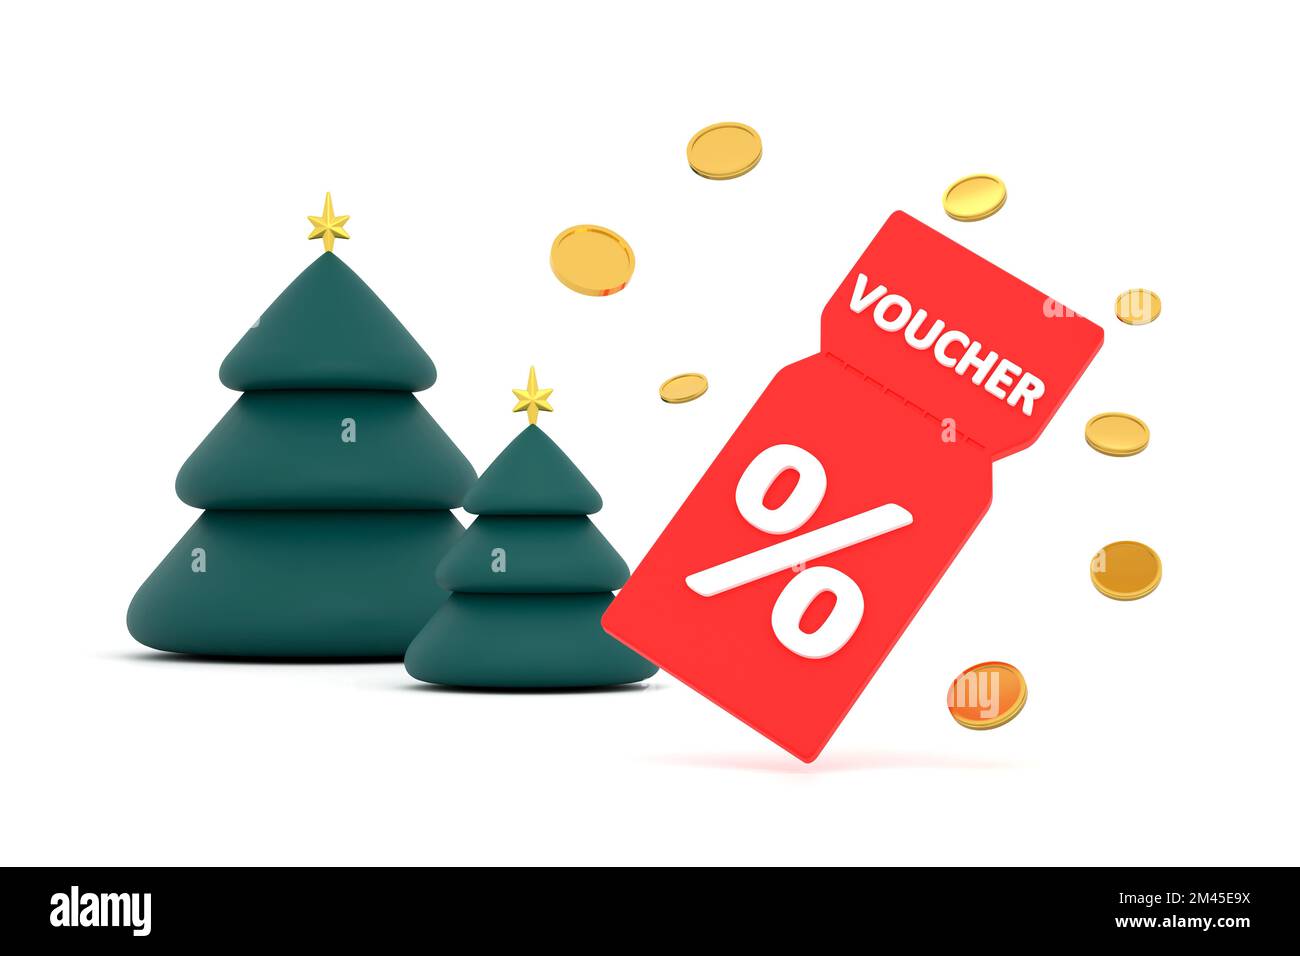 3D. discount coupon with percentage sign with coins. Voucher card cash back christmas tree. Stock Photo